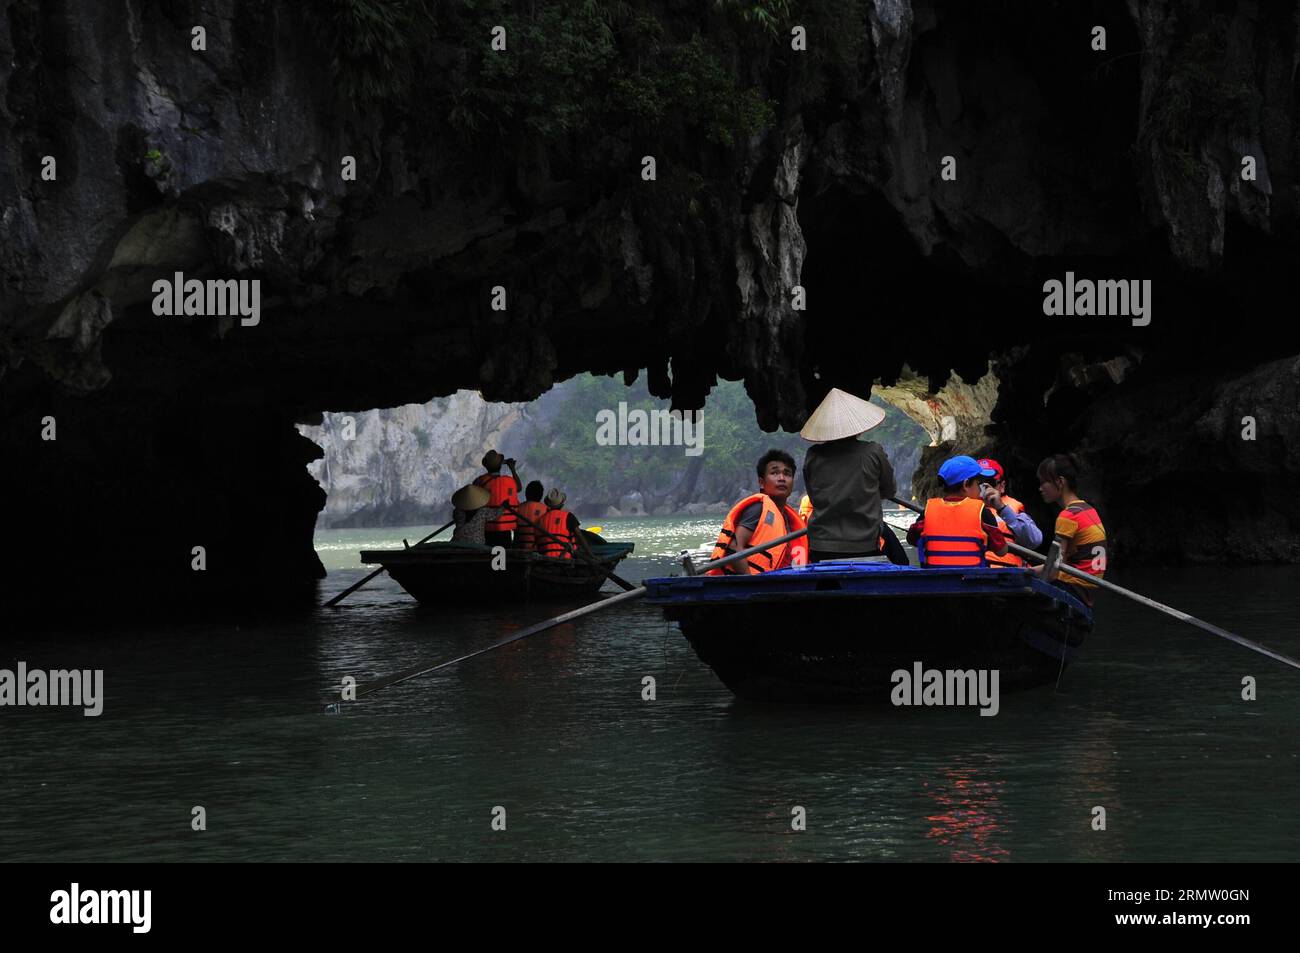 (140925) -- HA LONG BAY, Sept. 24, 2014 -- Boats sail through archs at the bottom of the islands in Ha Long Bay, north Vietnam, Sept. 24, 2014. Ha Long Bay, in the Gulf of Tonkin, includes some 1,600 islands and islets, forming a spectacular seascape of limestone pillars. Because of their precipitous nature, most of the islands are uninhabited and unaffected by a human presence. The site s outstanding scenic beauty is complemented by its great biological interest. It was inscripted in UNESCO s World Natural Heritage list in 1994. ) VIETNAM-HA LONG BAY-WORLD HERITAGE ZhangxJianhua PUBLICATIONxN Stock Photo